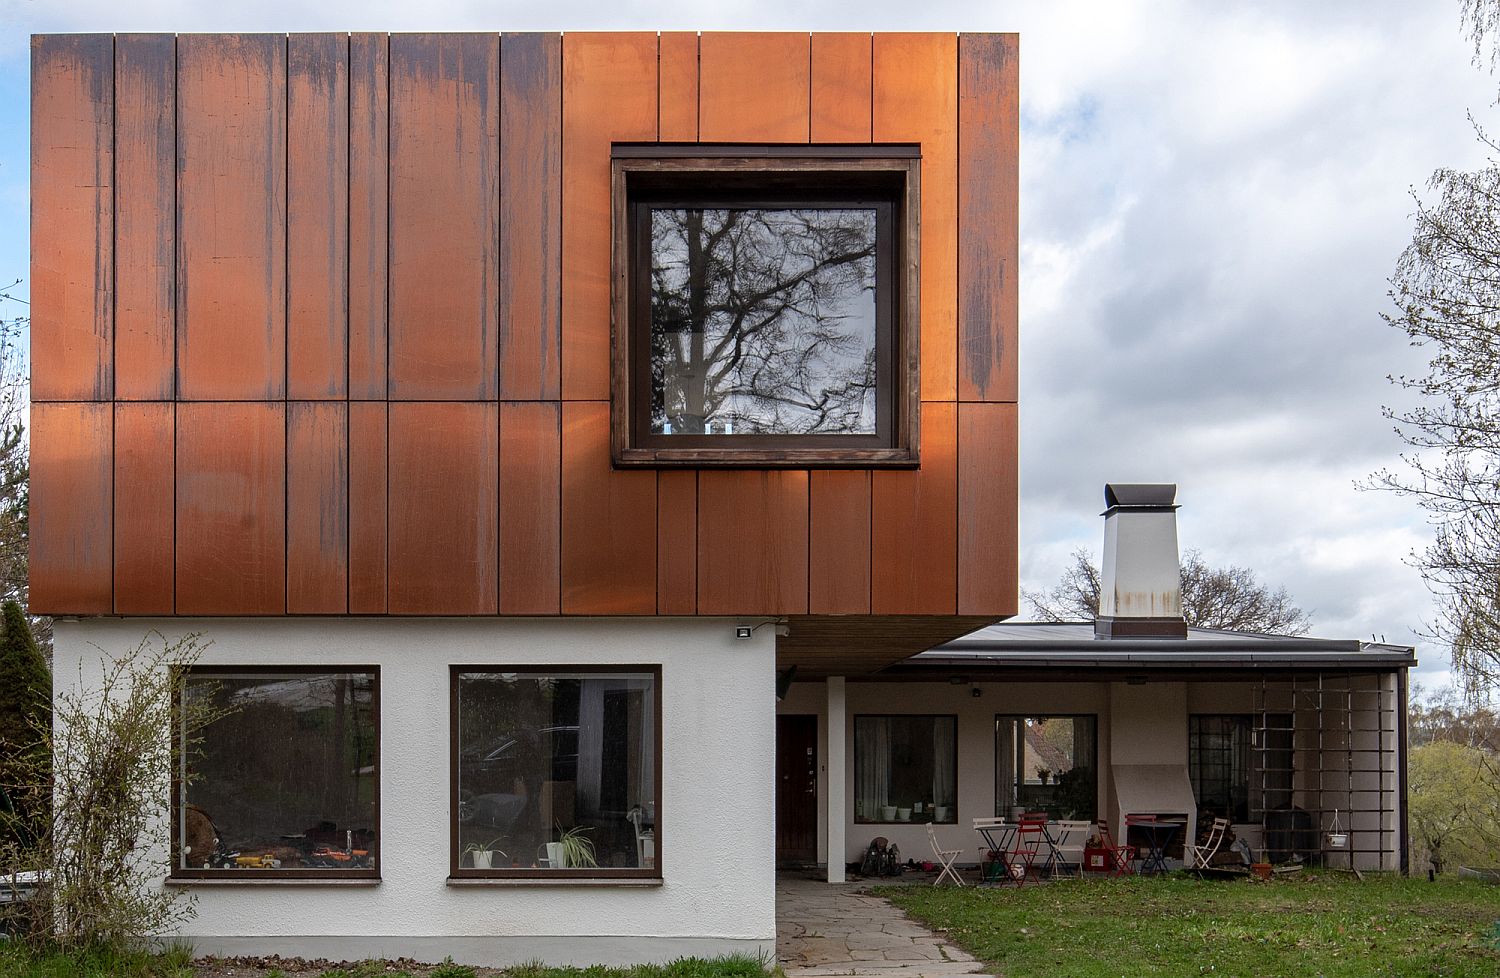 Copper panels with untreated finish gives the home a dynamic appeal